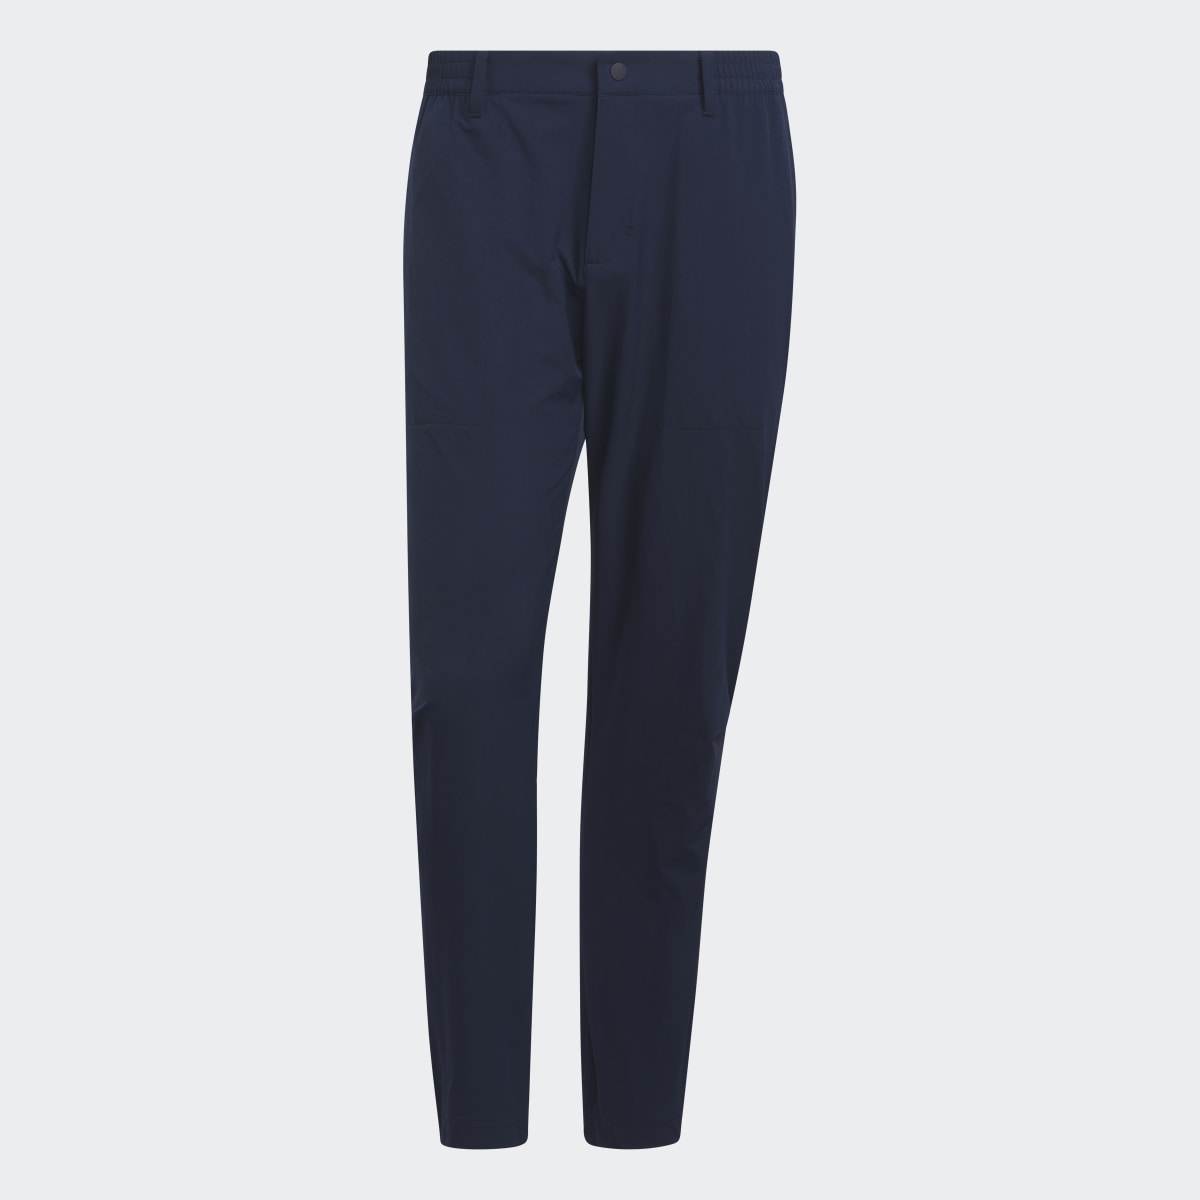 Adidas Go-To Commuter Trousers. 4